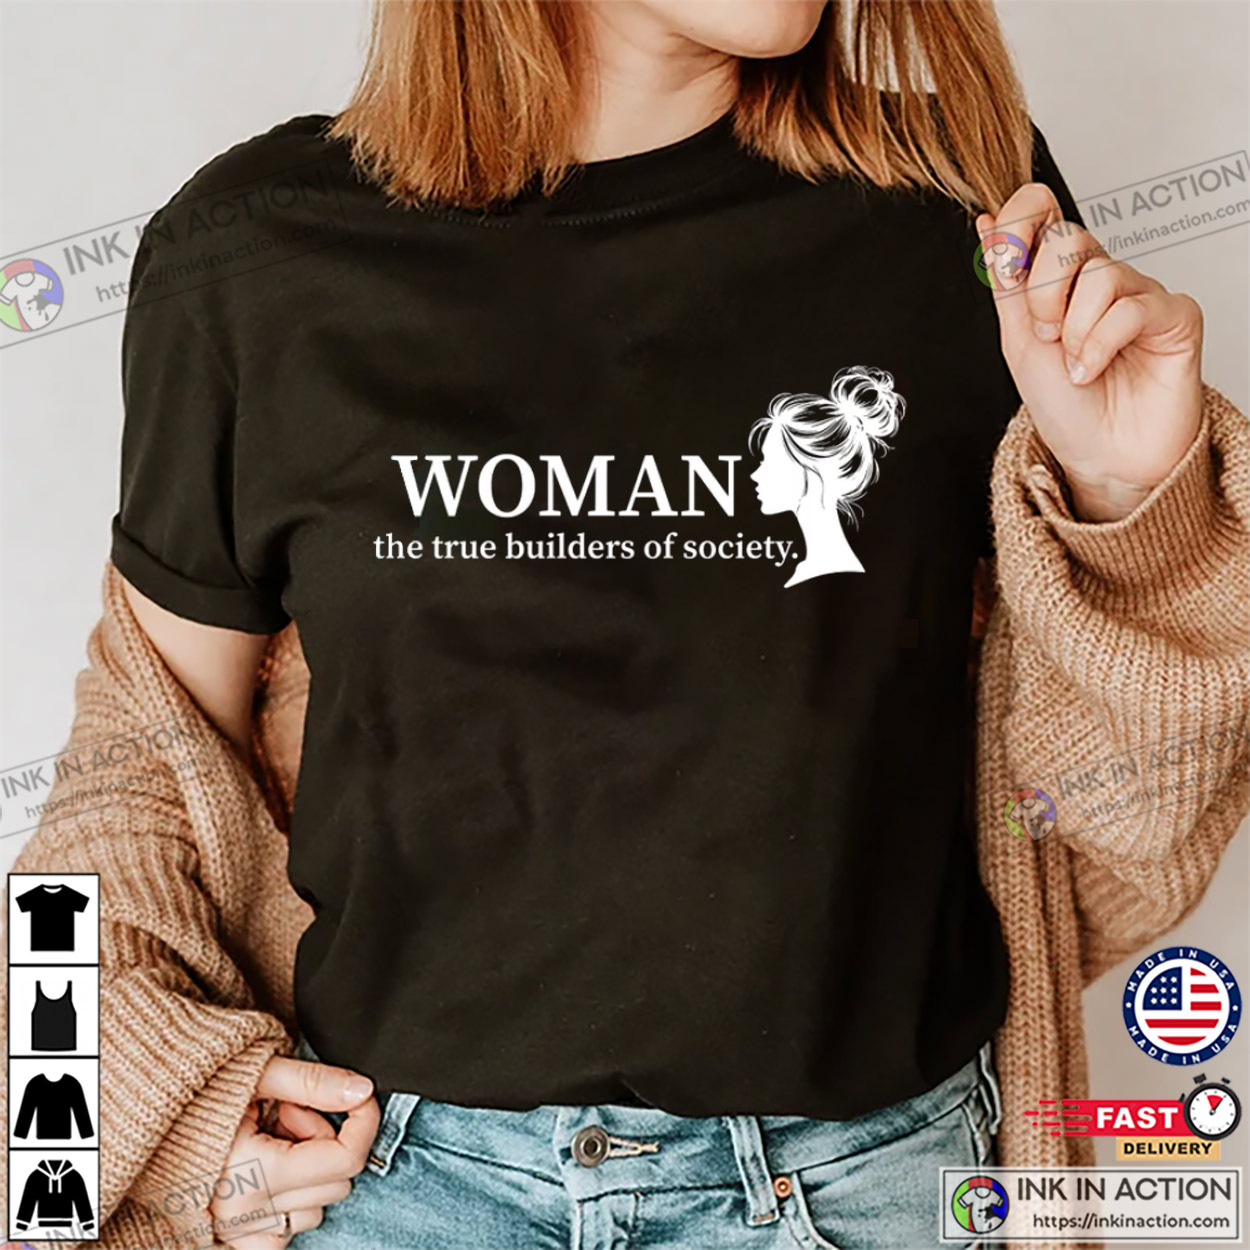 Woman the True Builders Of Society T-shirt, International Women Equality Day Merch